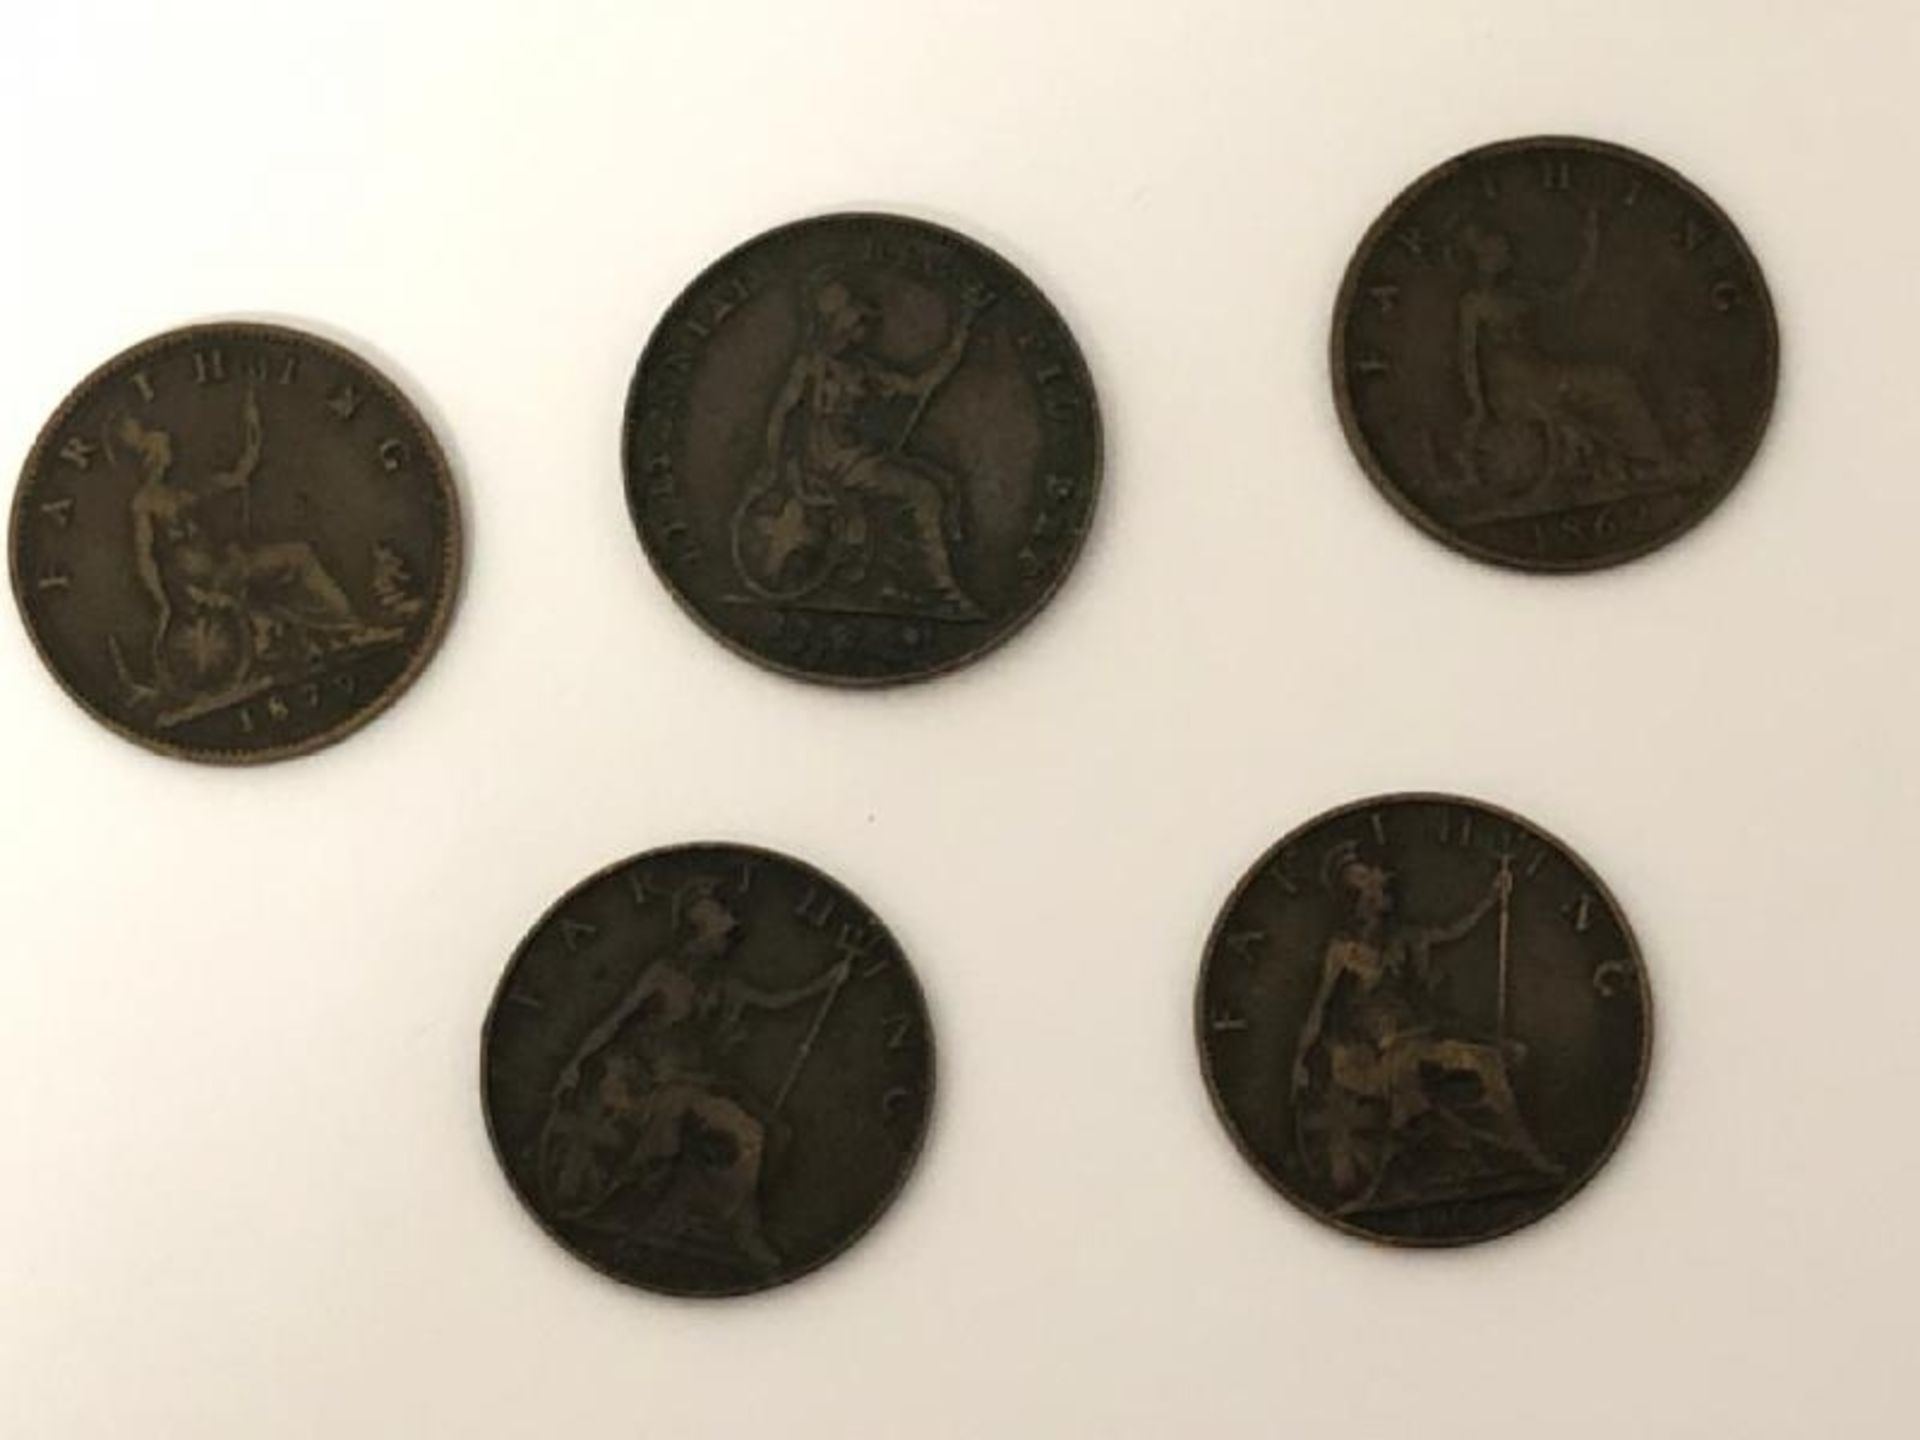 Five Queen Victoria coins dated 1840, 1879, 1862, 1898 and 1900 with five Edward VII coins / AN9 - Image 3 of 7